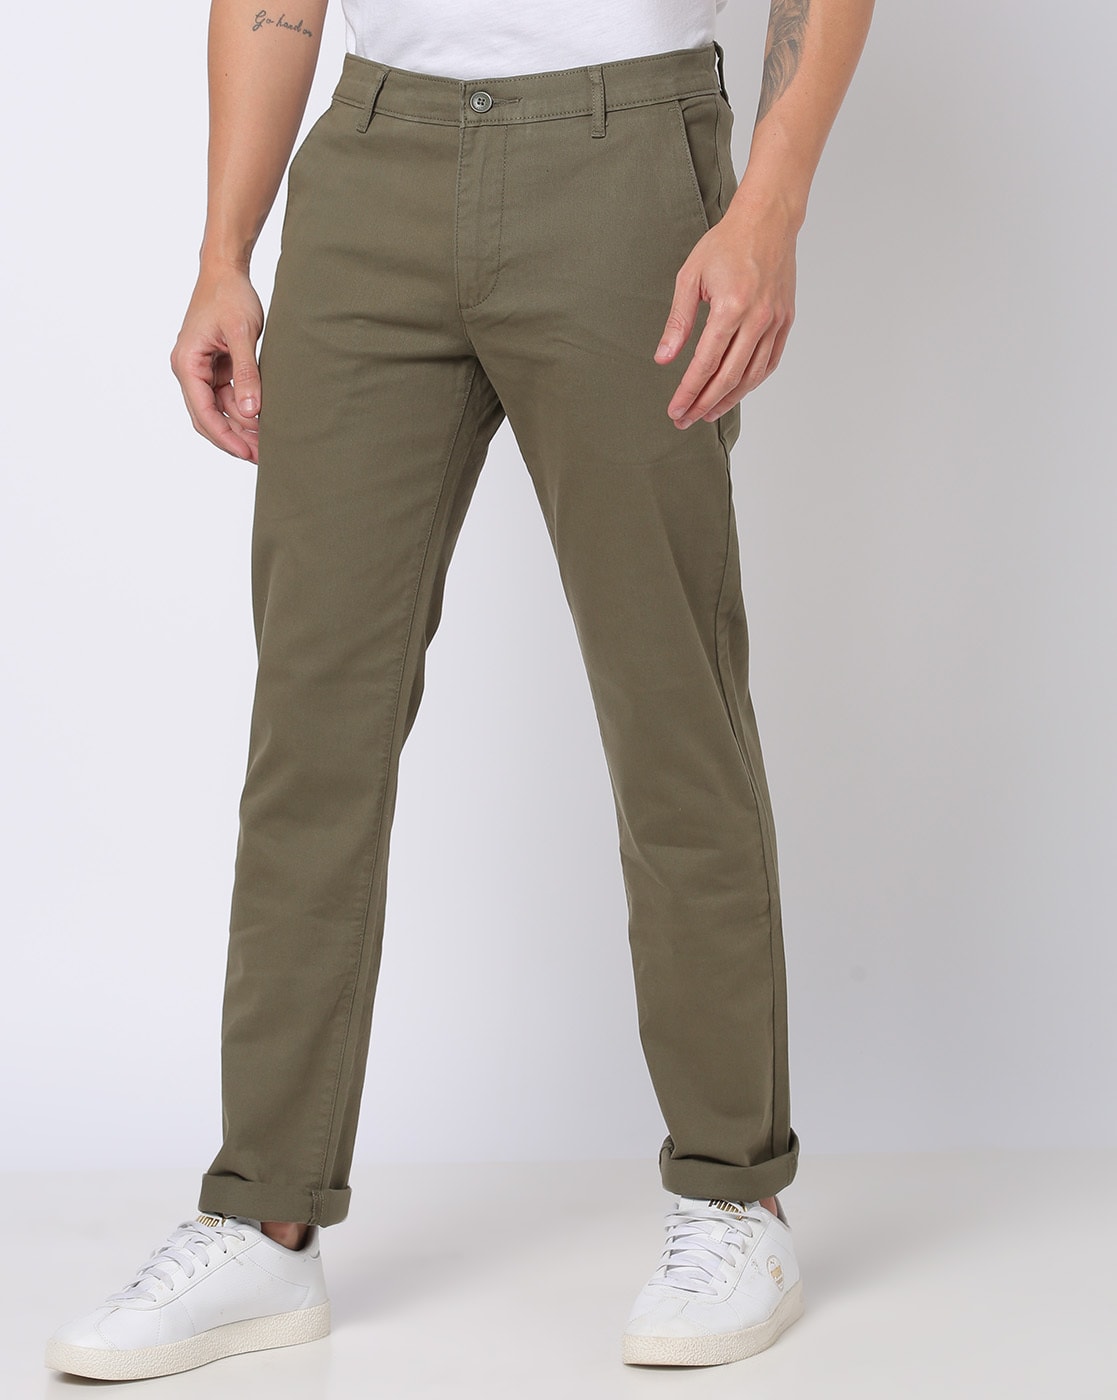 Buy Olive Green Trousers  Pants for Men by LEVIS Online  Ajiocom